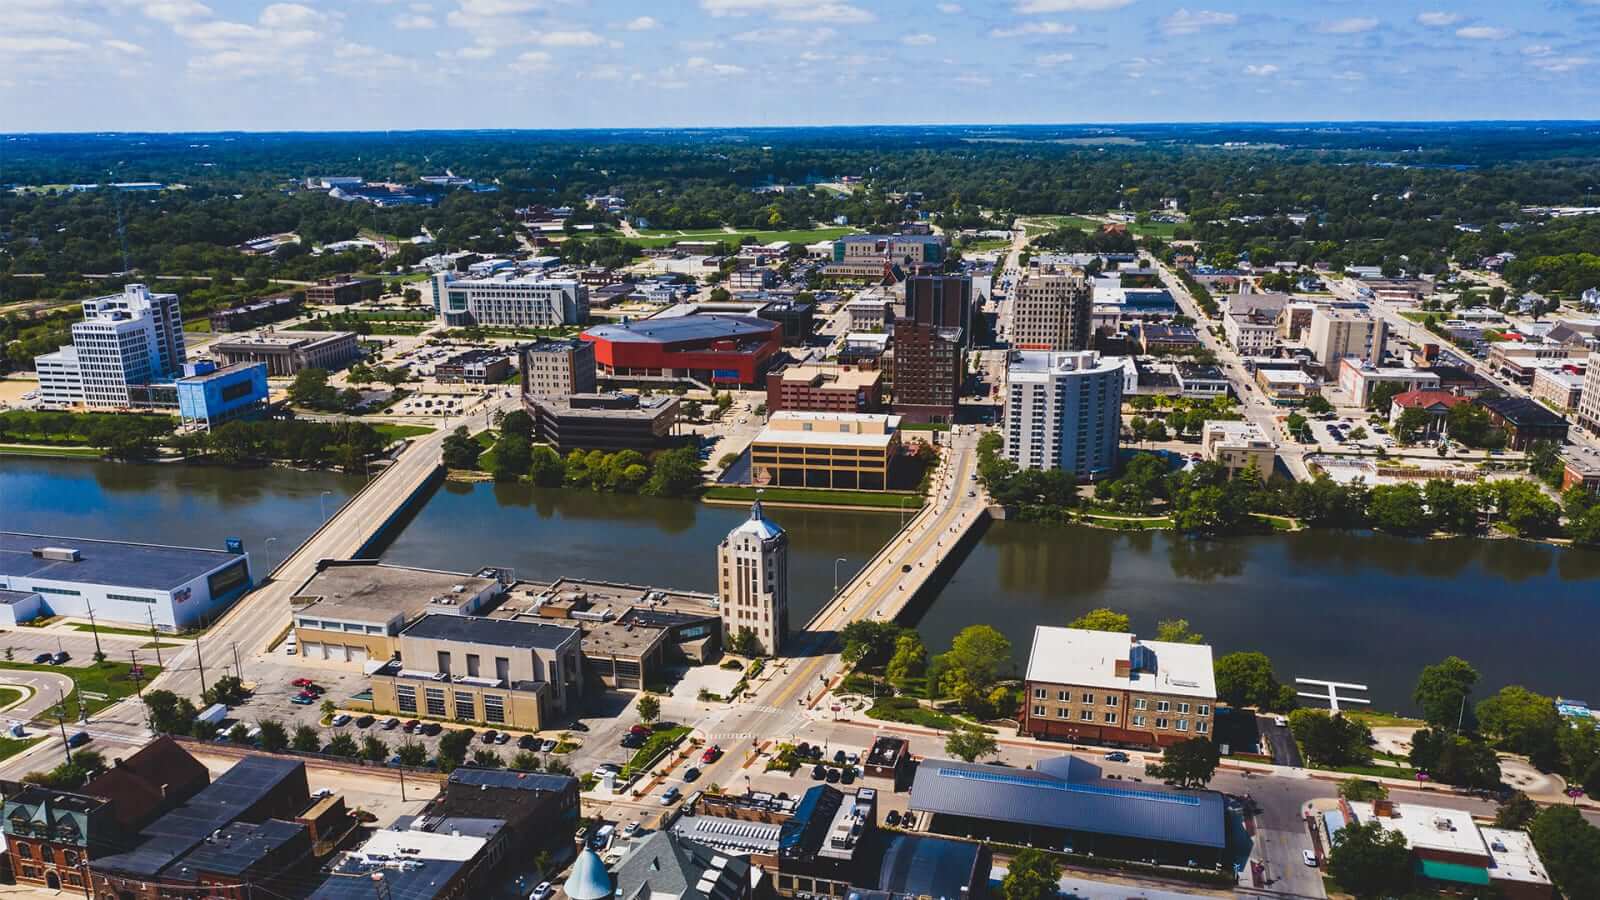 An aerial image of downtown Rockford, Illinois